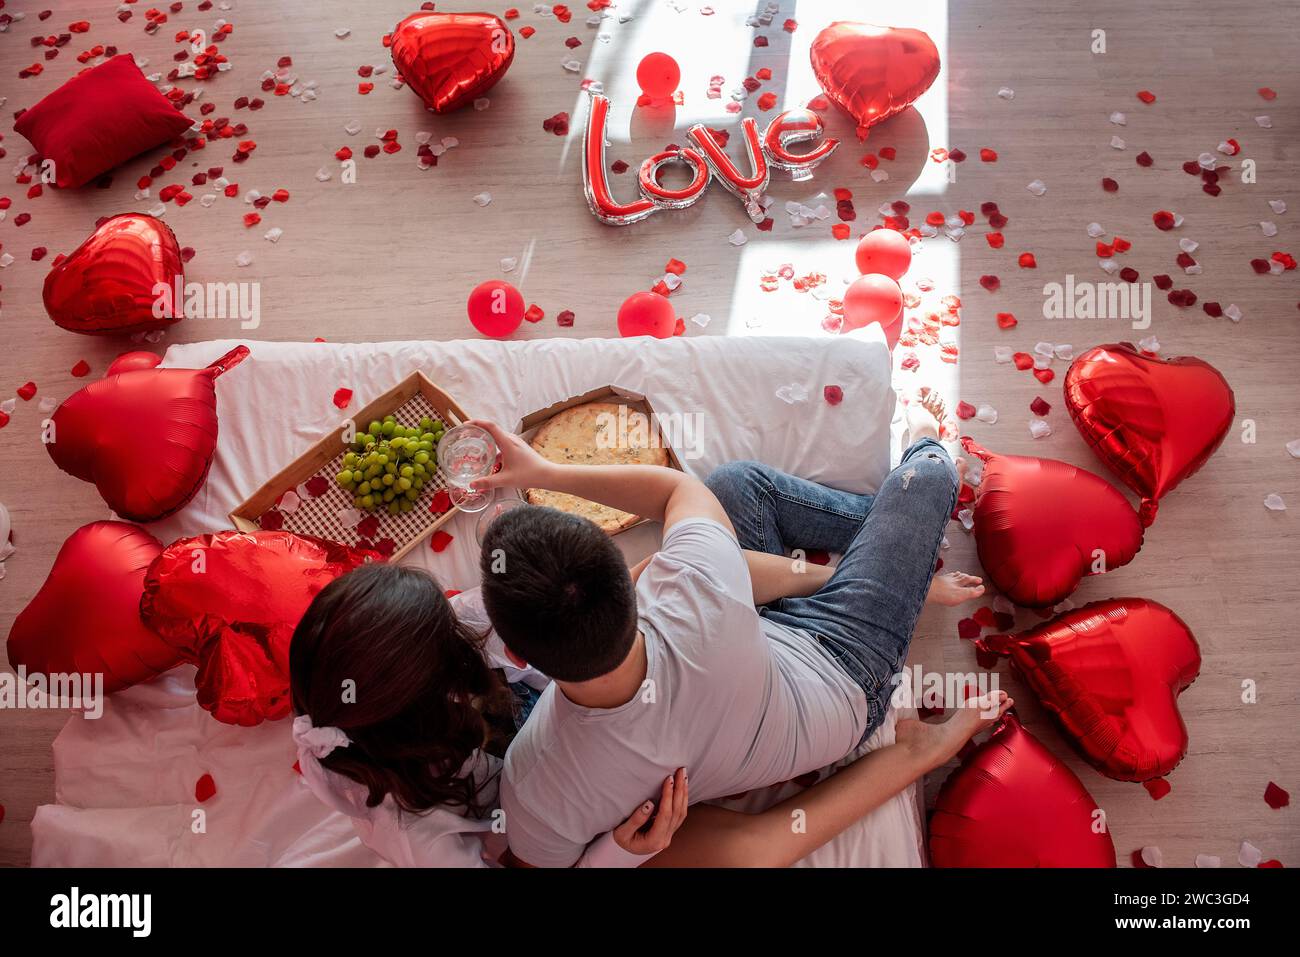 Top view of young couple sharing casual, intimate moment together on bed with red heart shaped balloons. Man and woman embracing each others in Valent Stock Photo